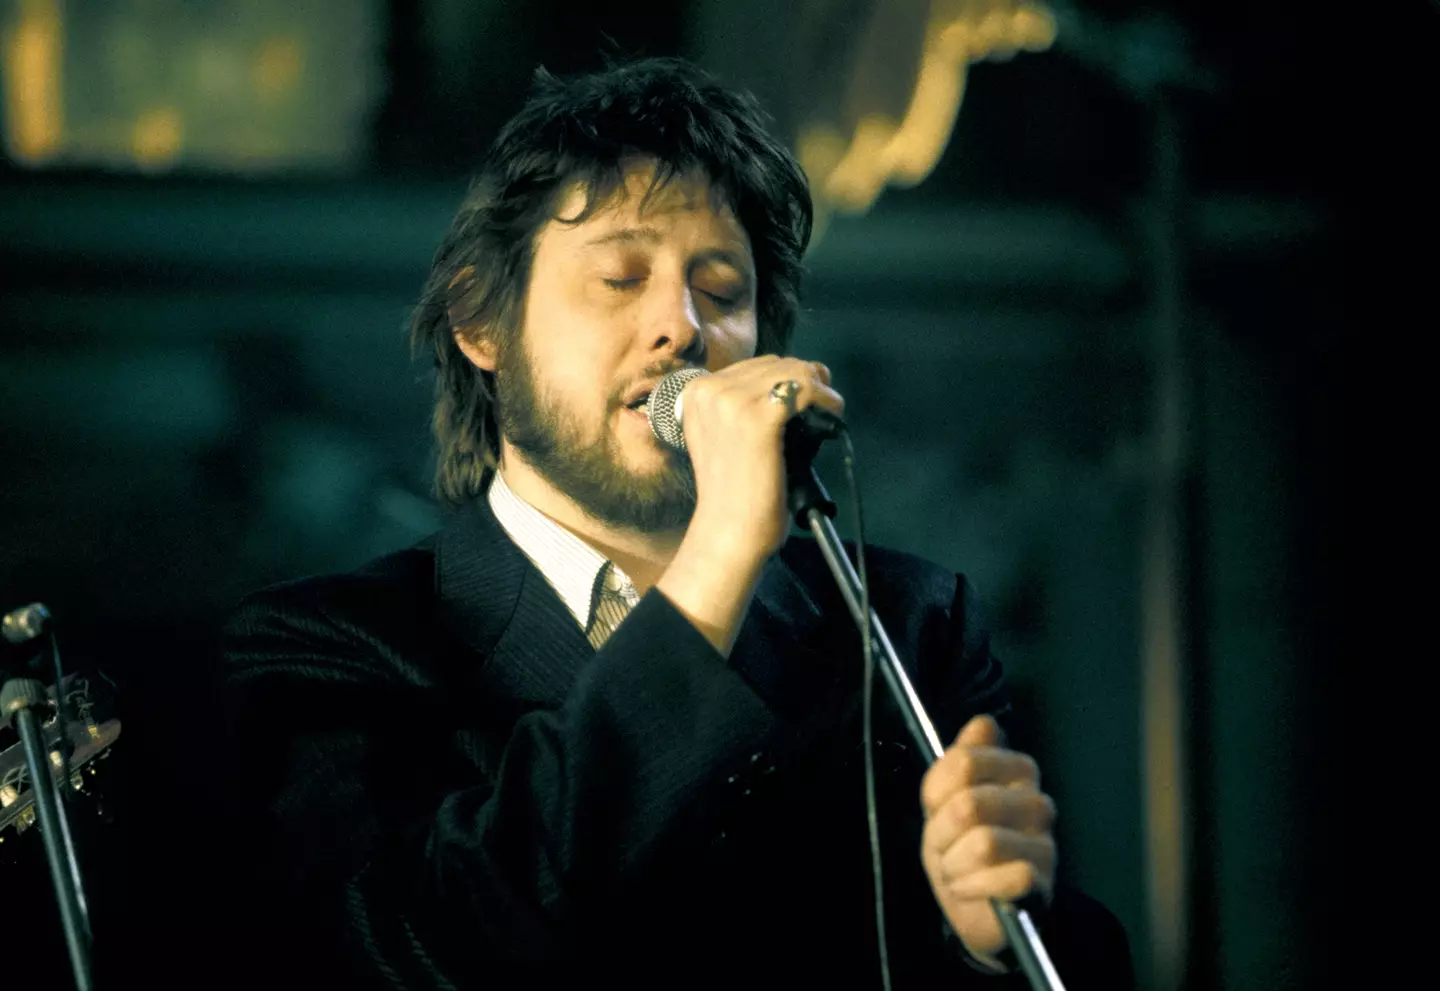 MacGowan left The Pogues in 1991.